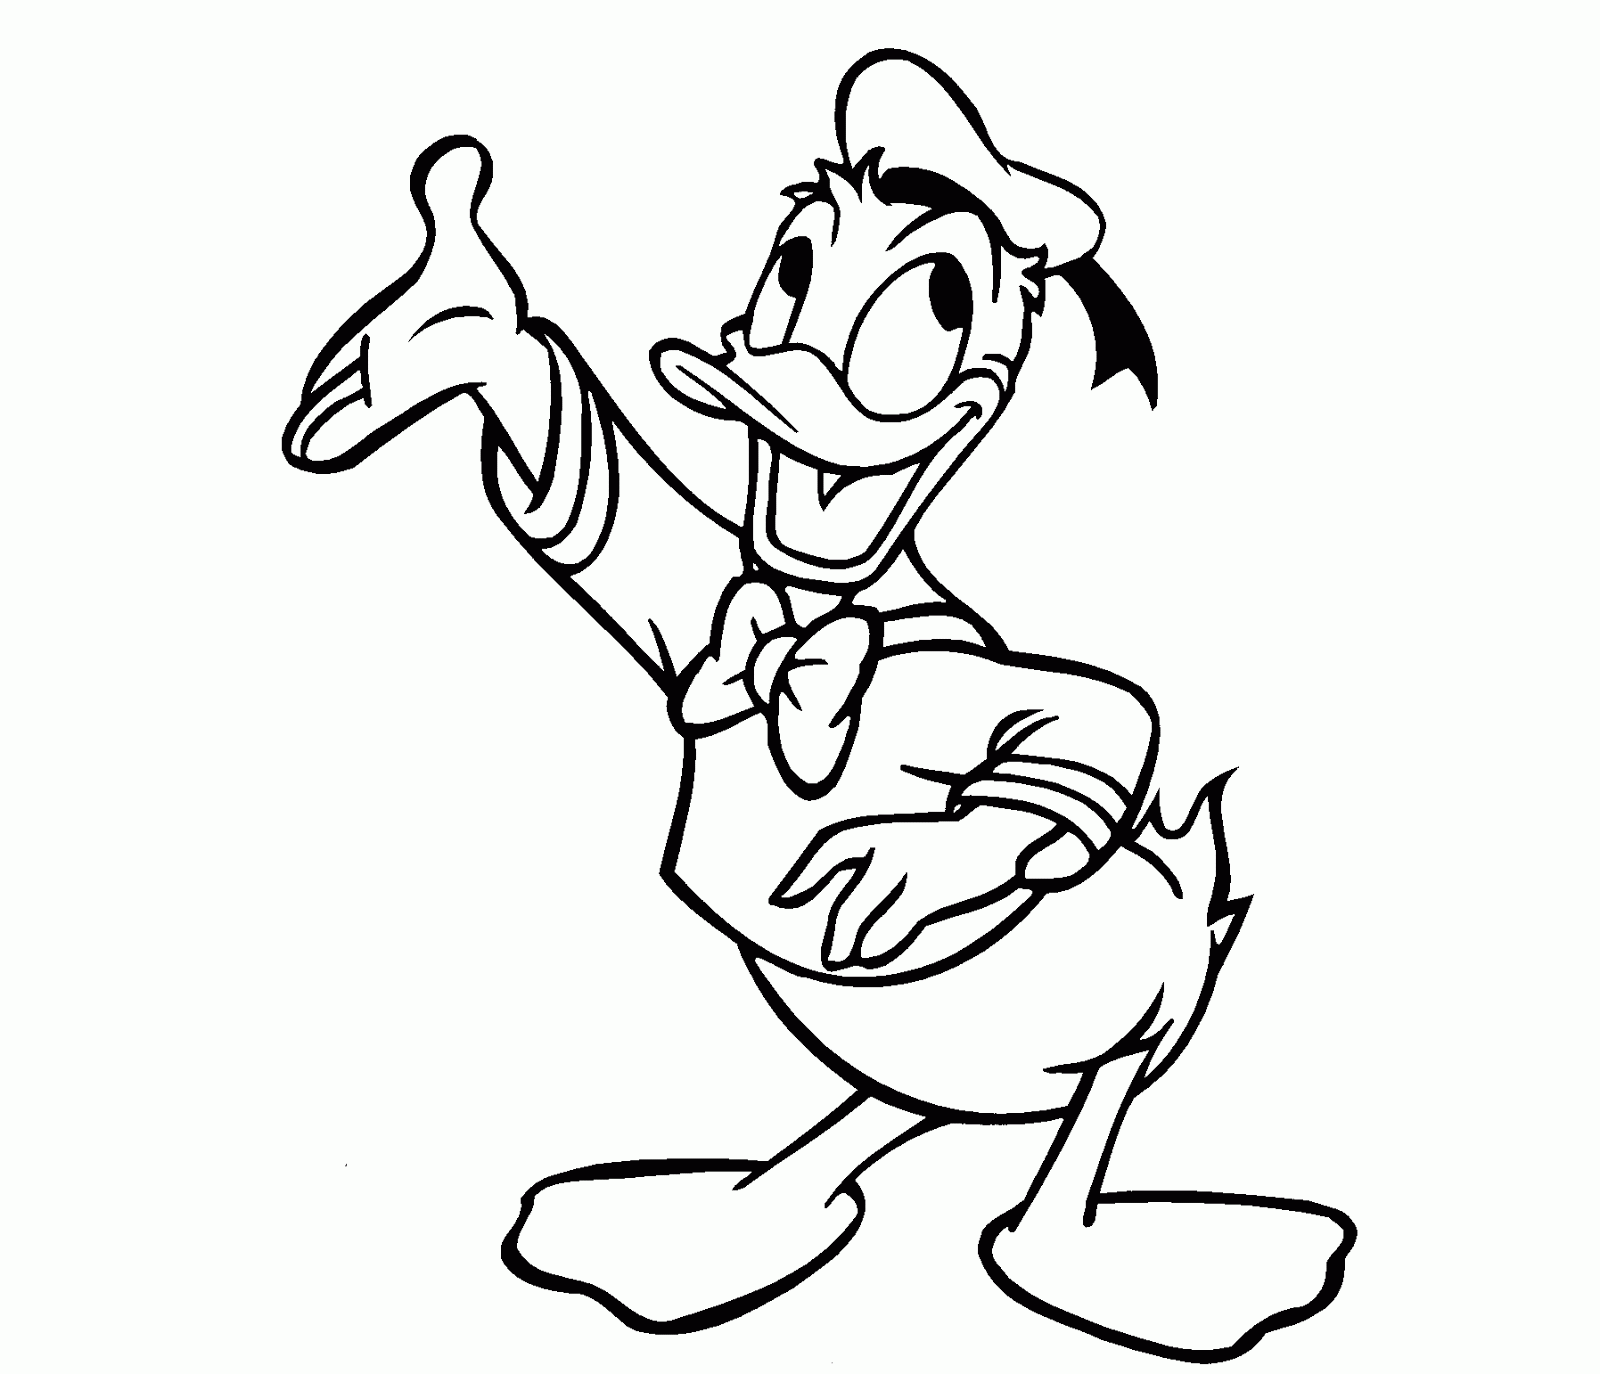 Donald Duck Image Drawing